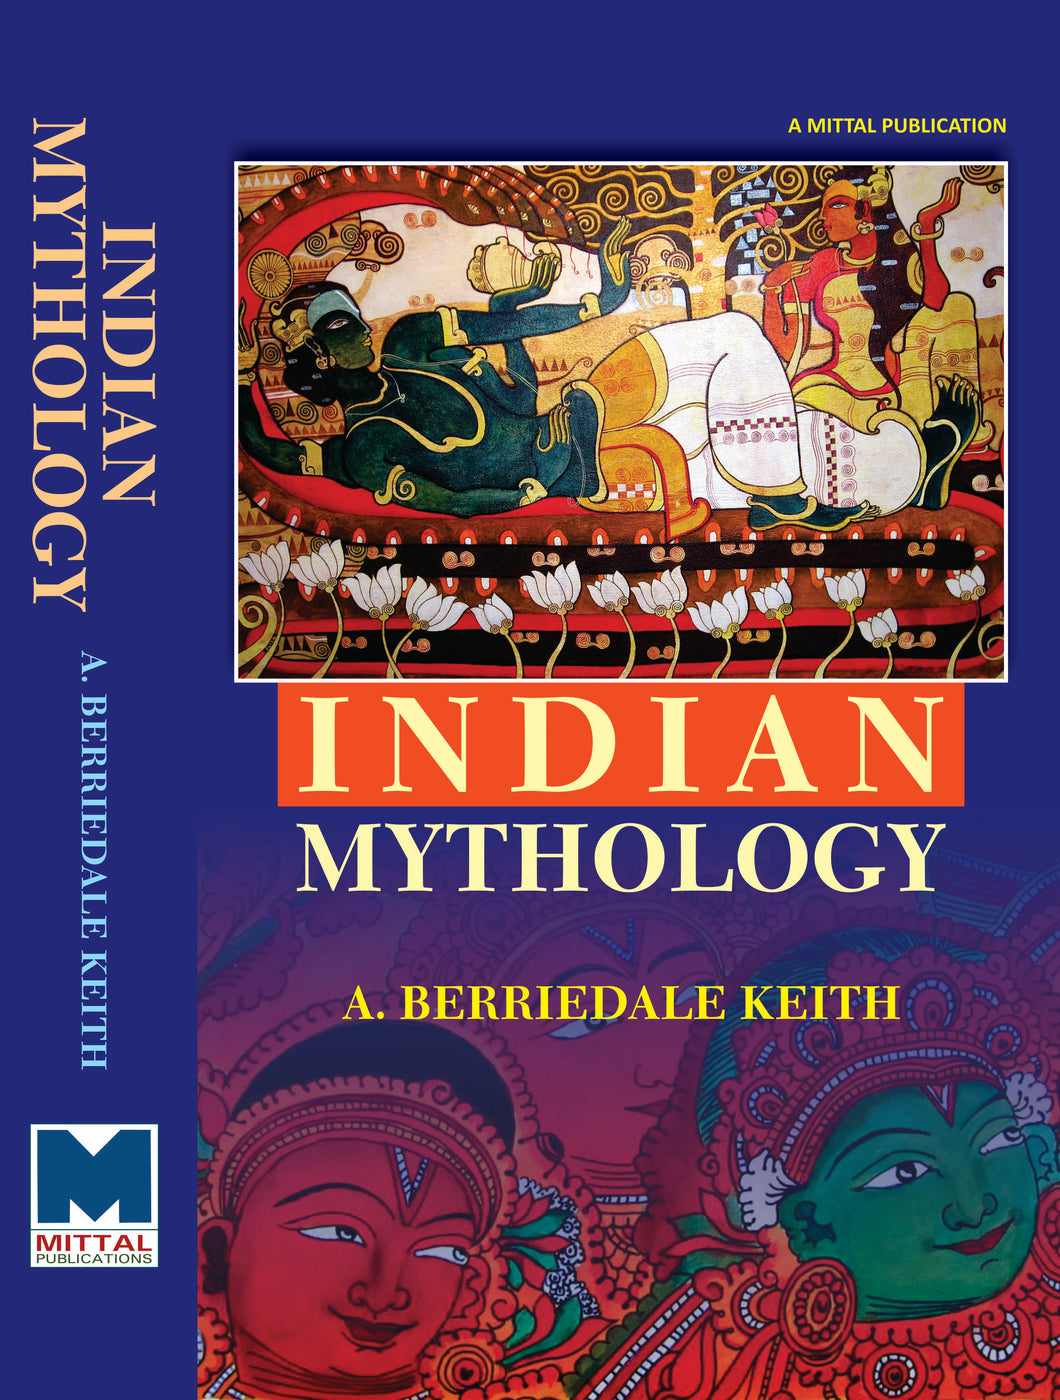 Indian Mythology by A. Berriedale Keith [2022]